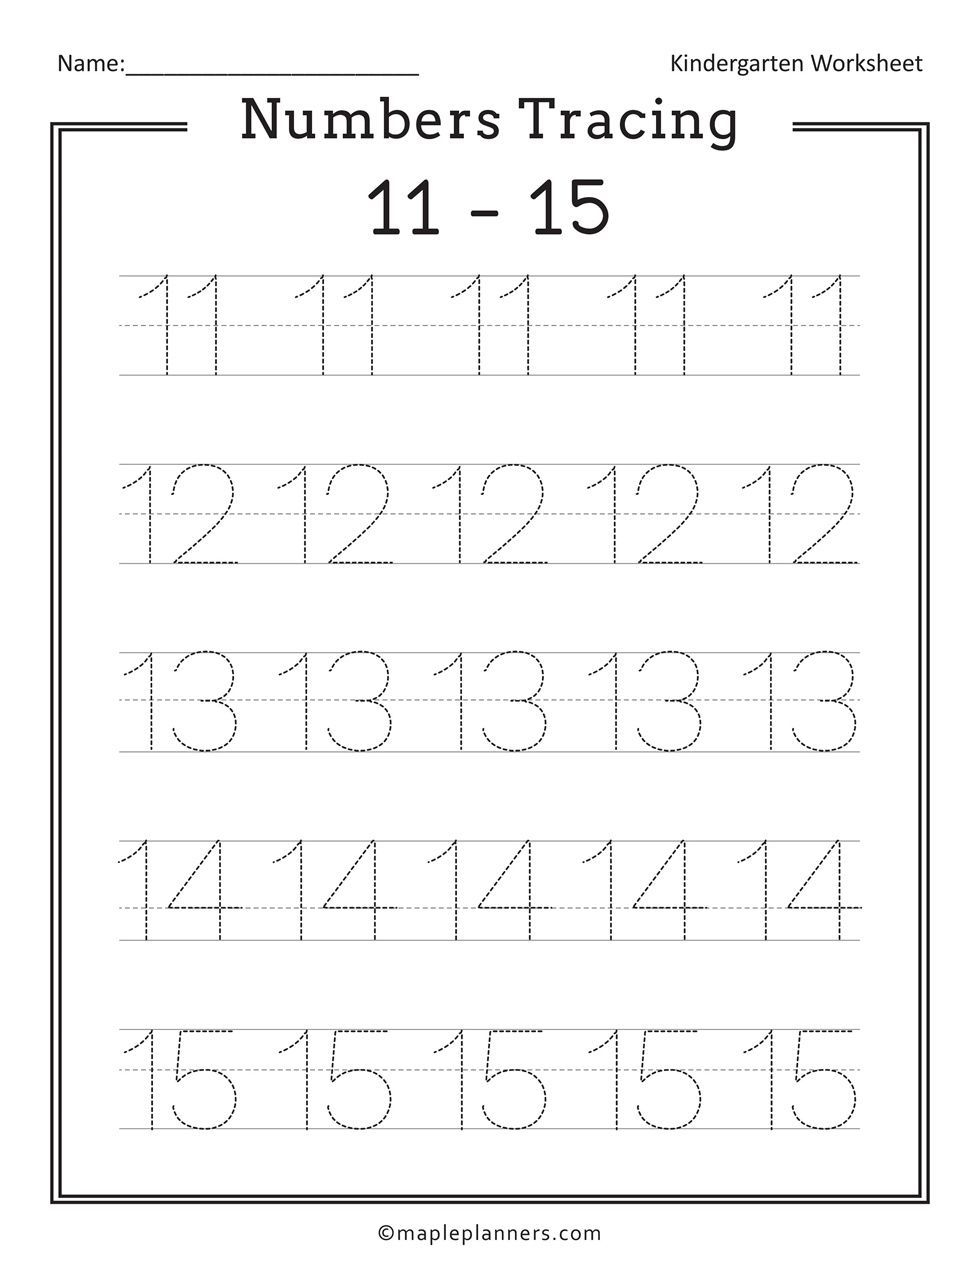 Free Printable Numbers Tracing 1 20 Worksheets For Kids Tracing Worksheets Preschool Math Worksheets Writing Numbers